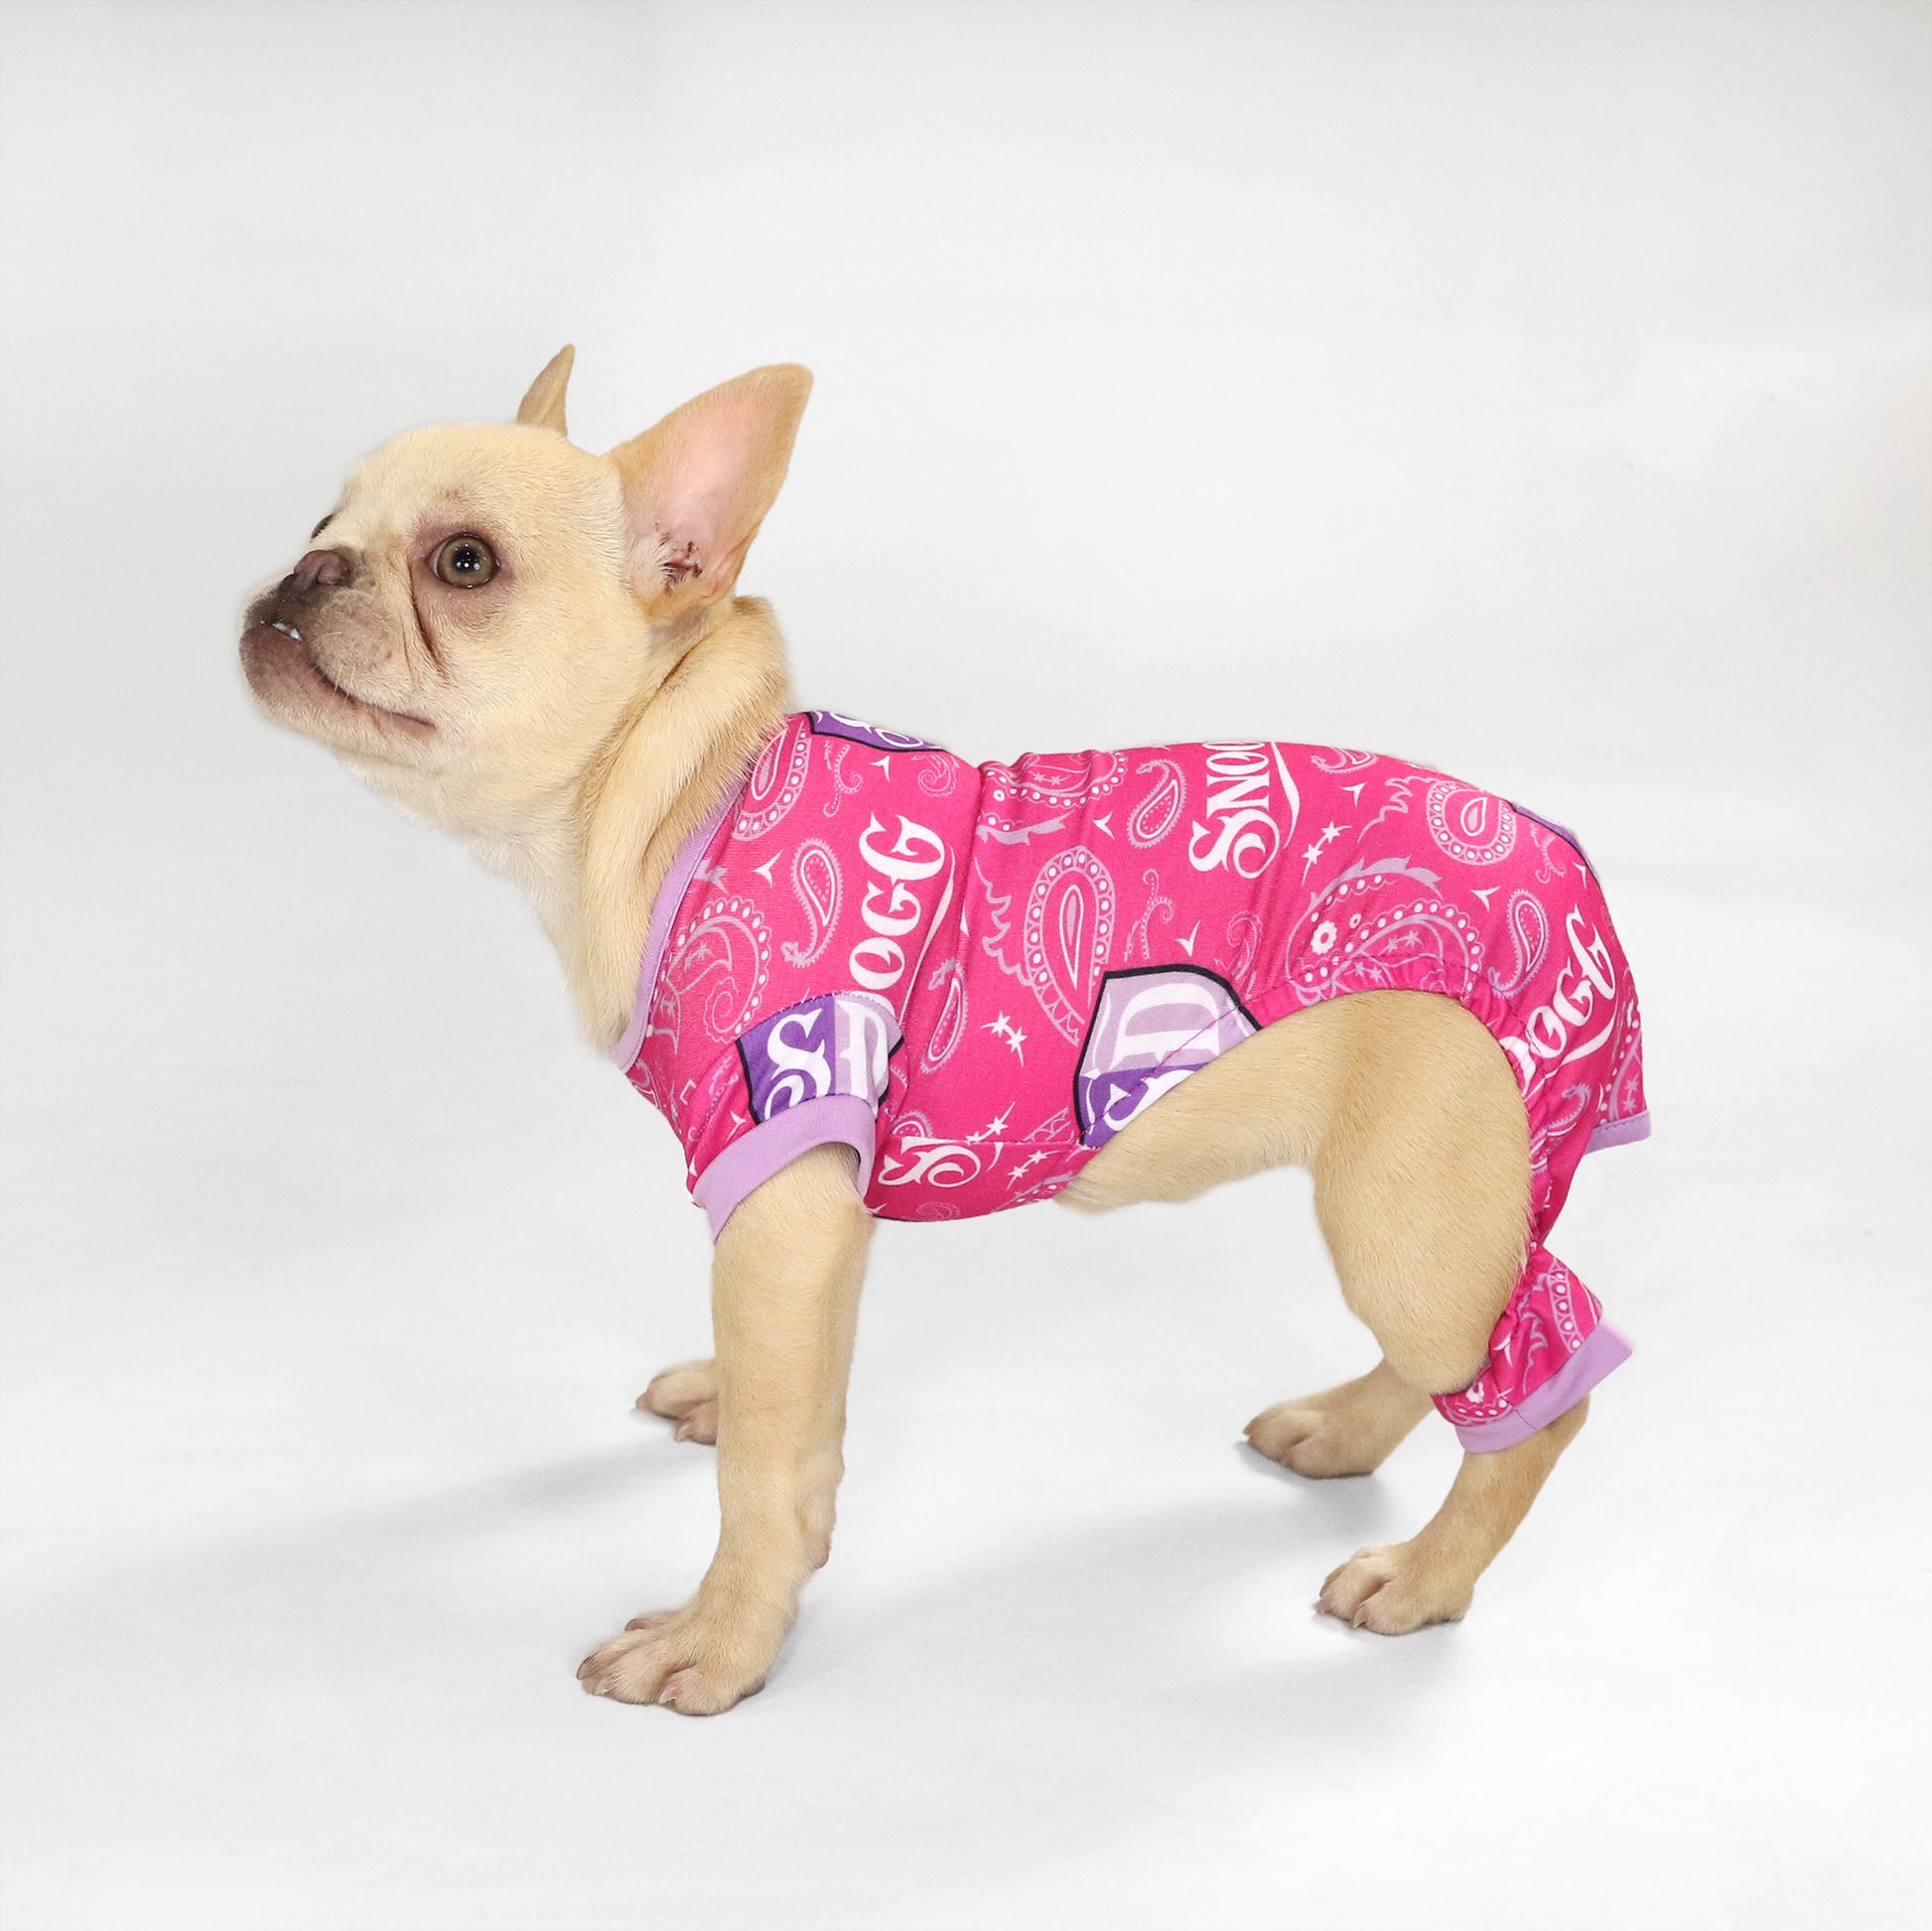 Fern the French Bulldog wearing the Boss Lady Deluxe Pet PJs in size Extra Small.